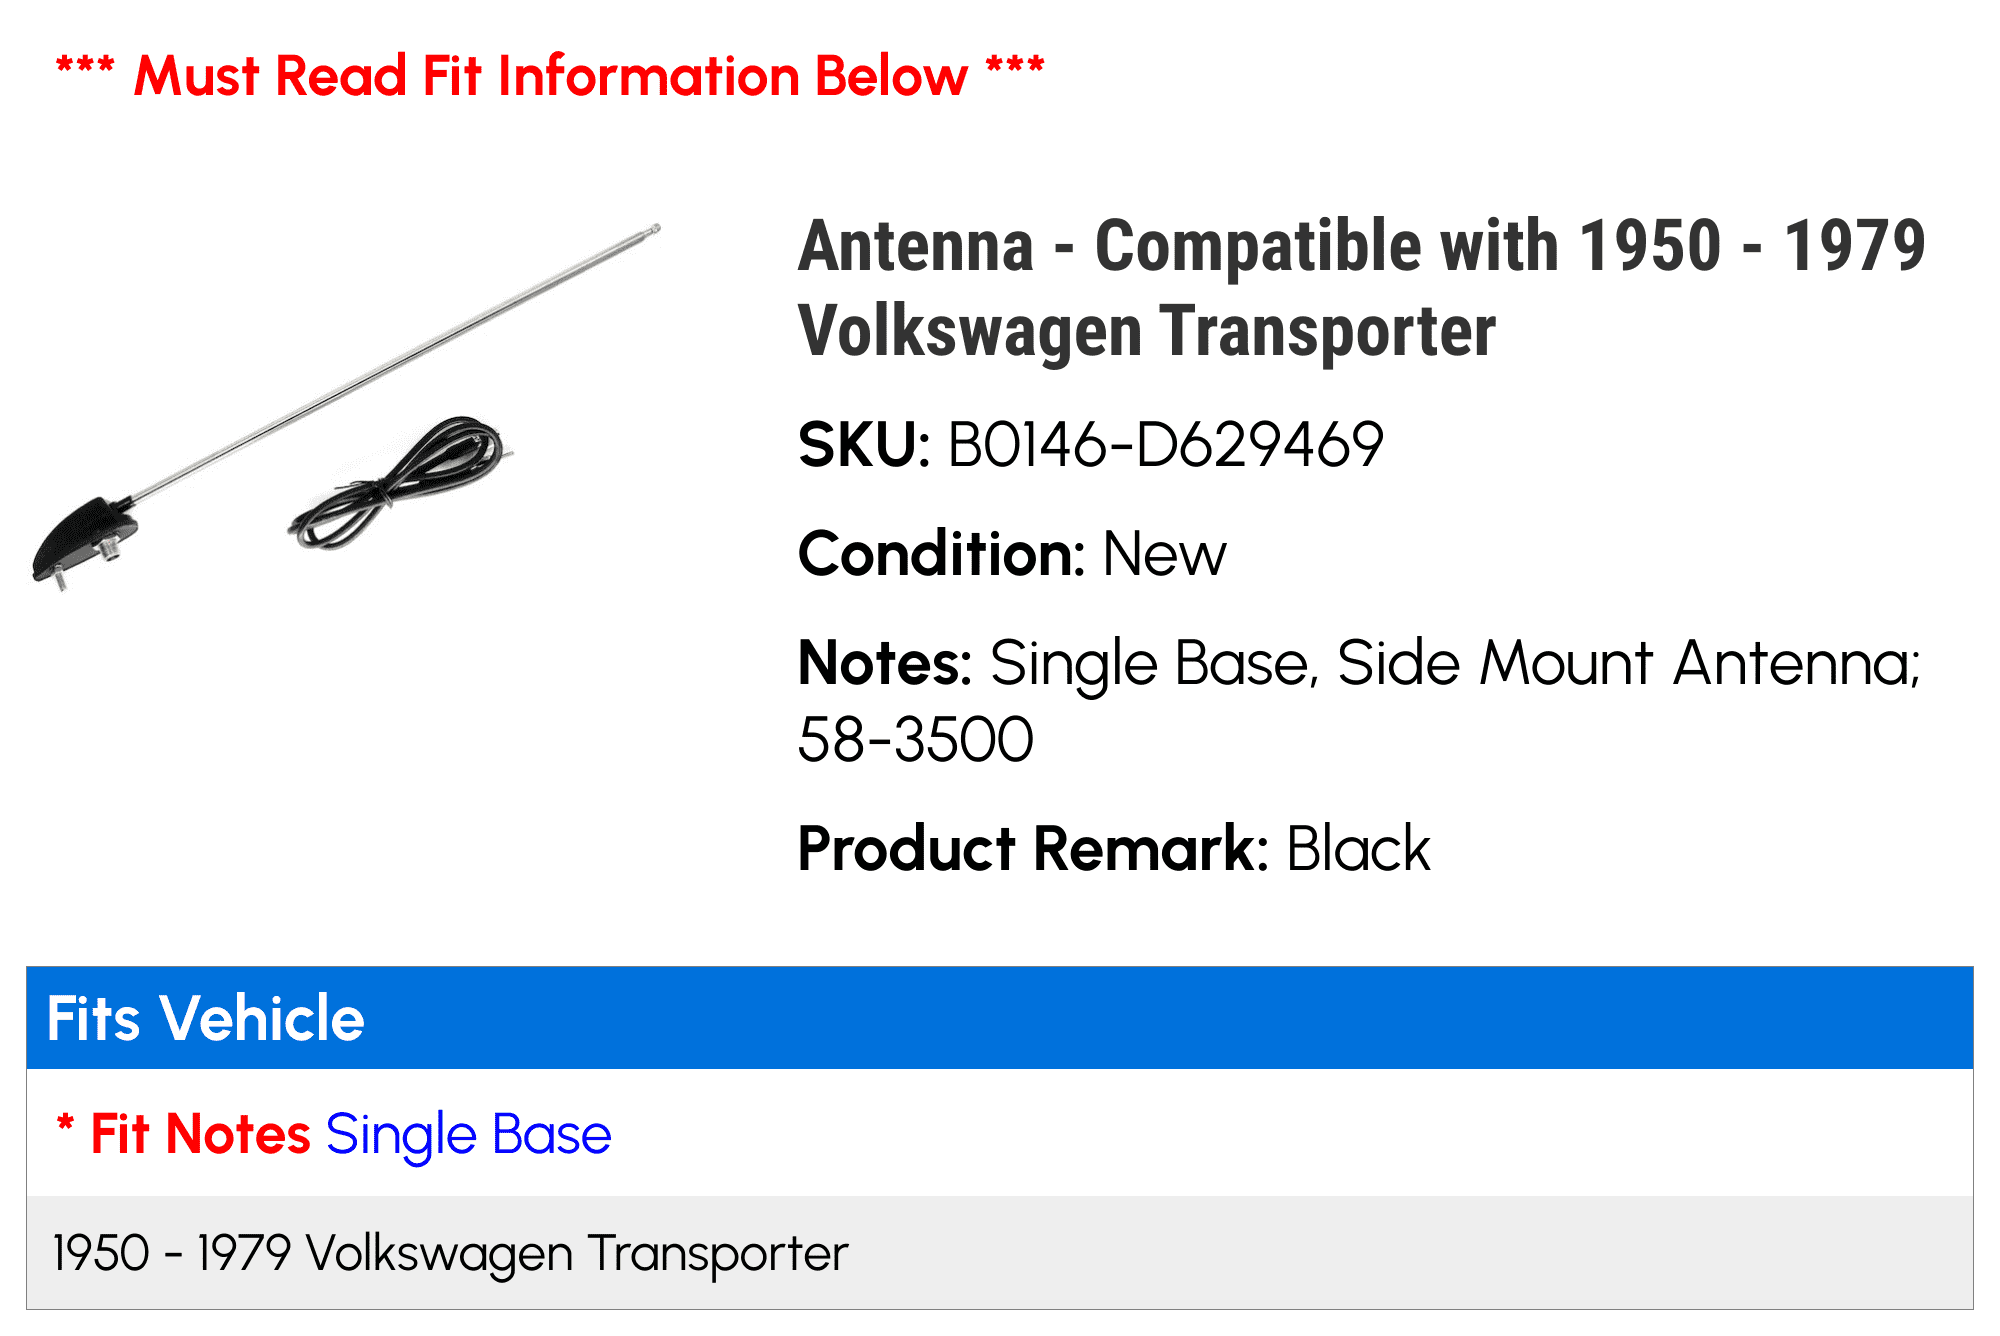 Antenna - Compatible with 1950 - 1979 Volkswagen Transporter 1951 1952 1953  1954 1955 1956 1957 1958 1959 1960 1961 1962 1963 1964 1965 1966 1967 1968  1969 1970 1971 1972 1973 1974 1975 1976 1977 